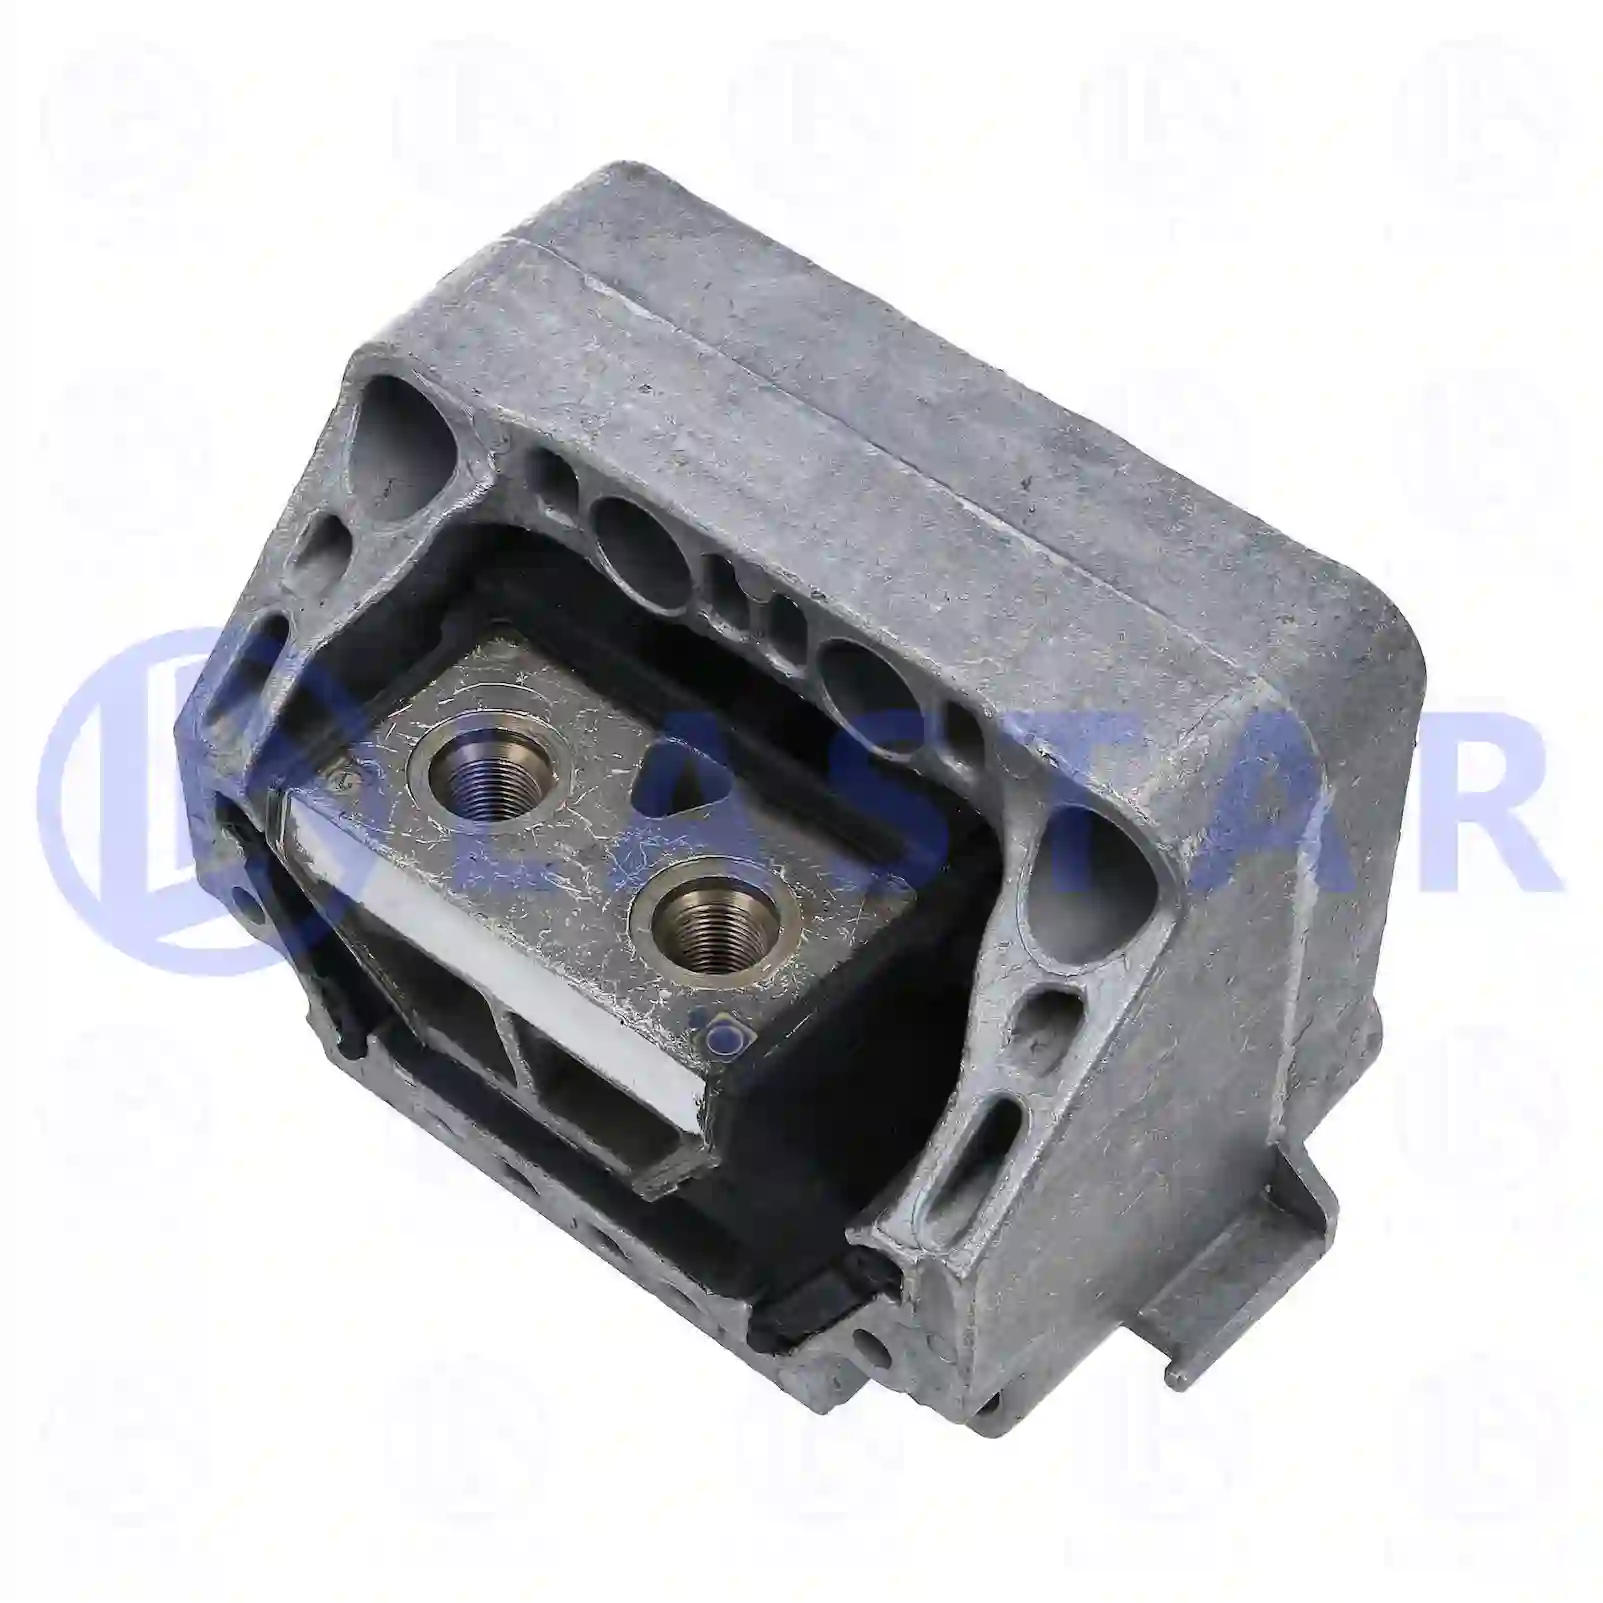 Engine mounting, 77702450, 9612416313 ||  77702450 Lastar Spare Part | Truck Spare Parts, Auotomotive Spare Parts Engine mounting, 77702450, 9612416313 ||  77702450 Lastar Spare Part | Truck Spare Parts, Auotomotive Spare Parts